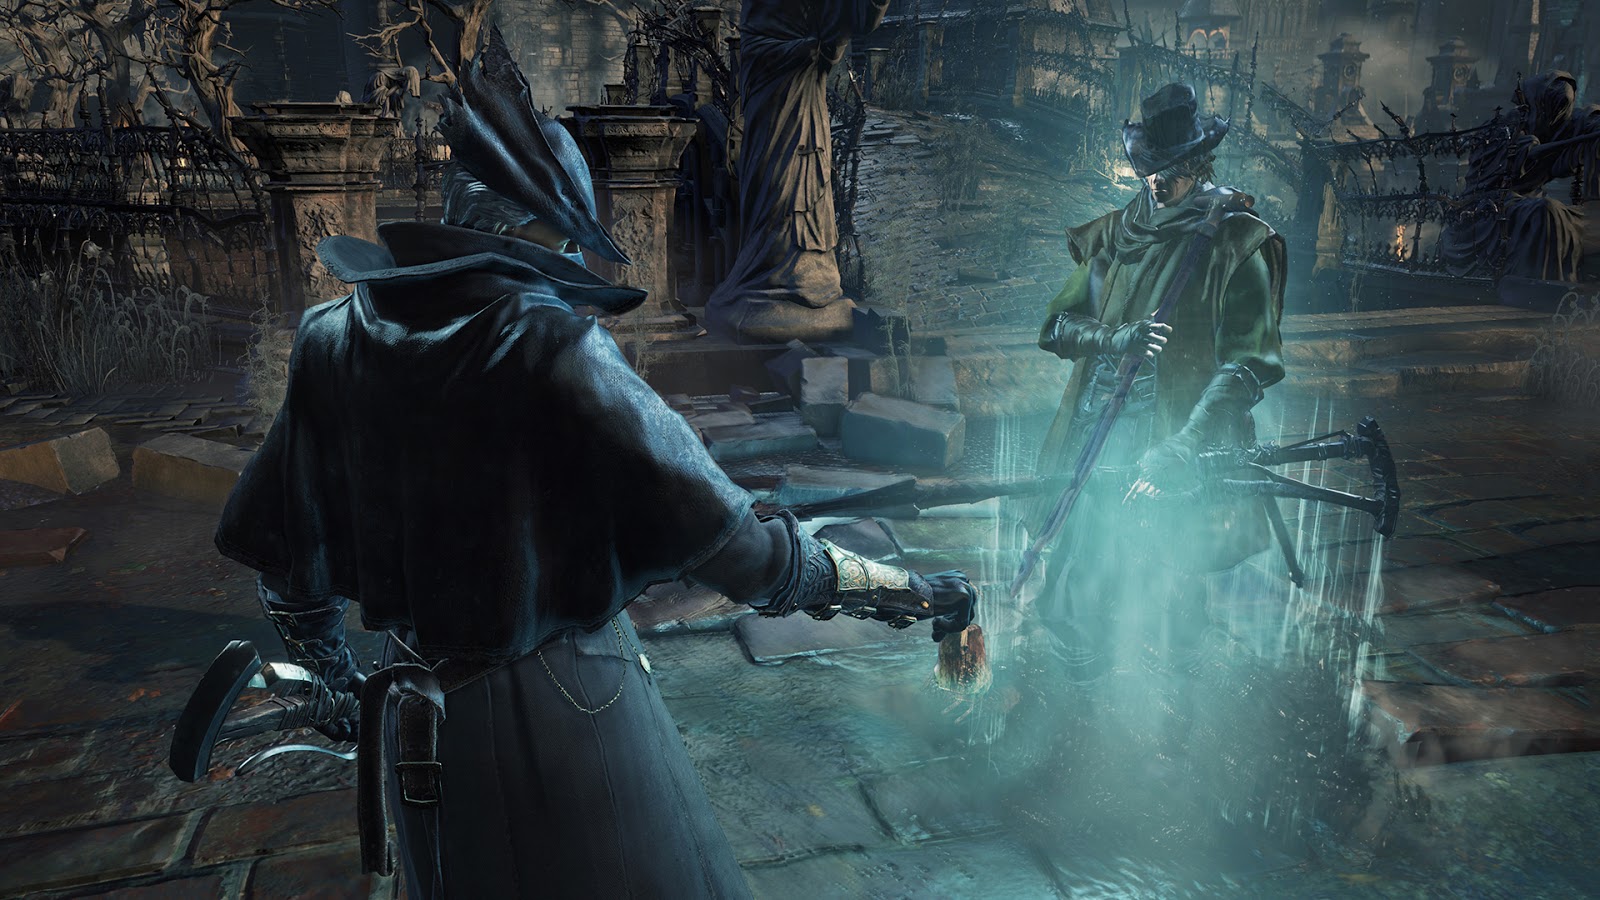 Polygon's 2015 Games of the Year #2: Bloodborne